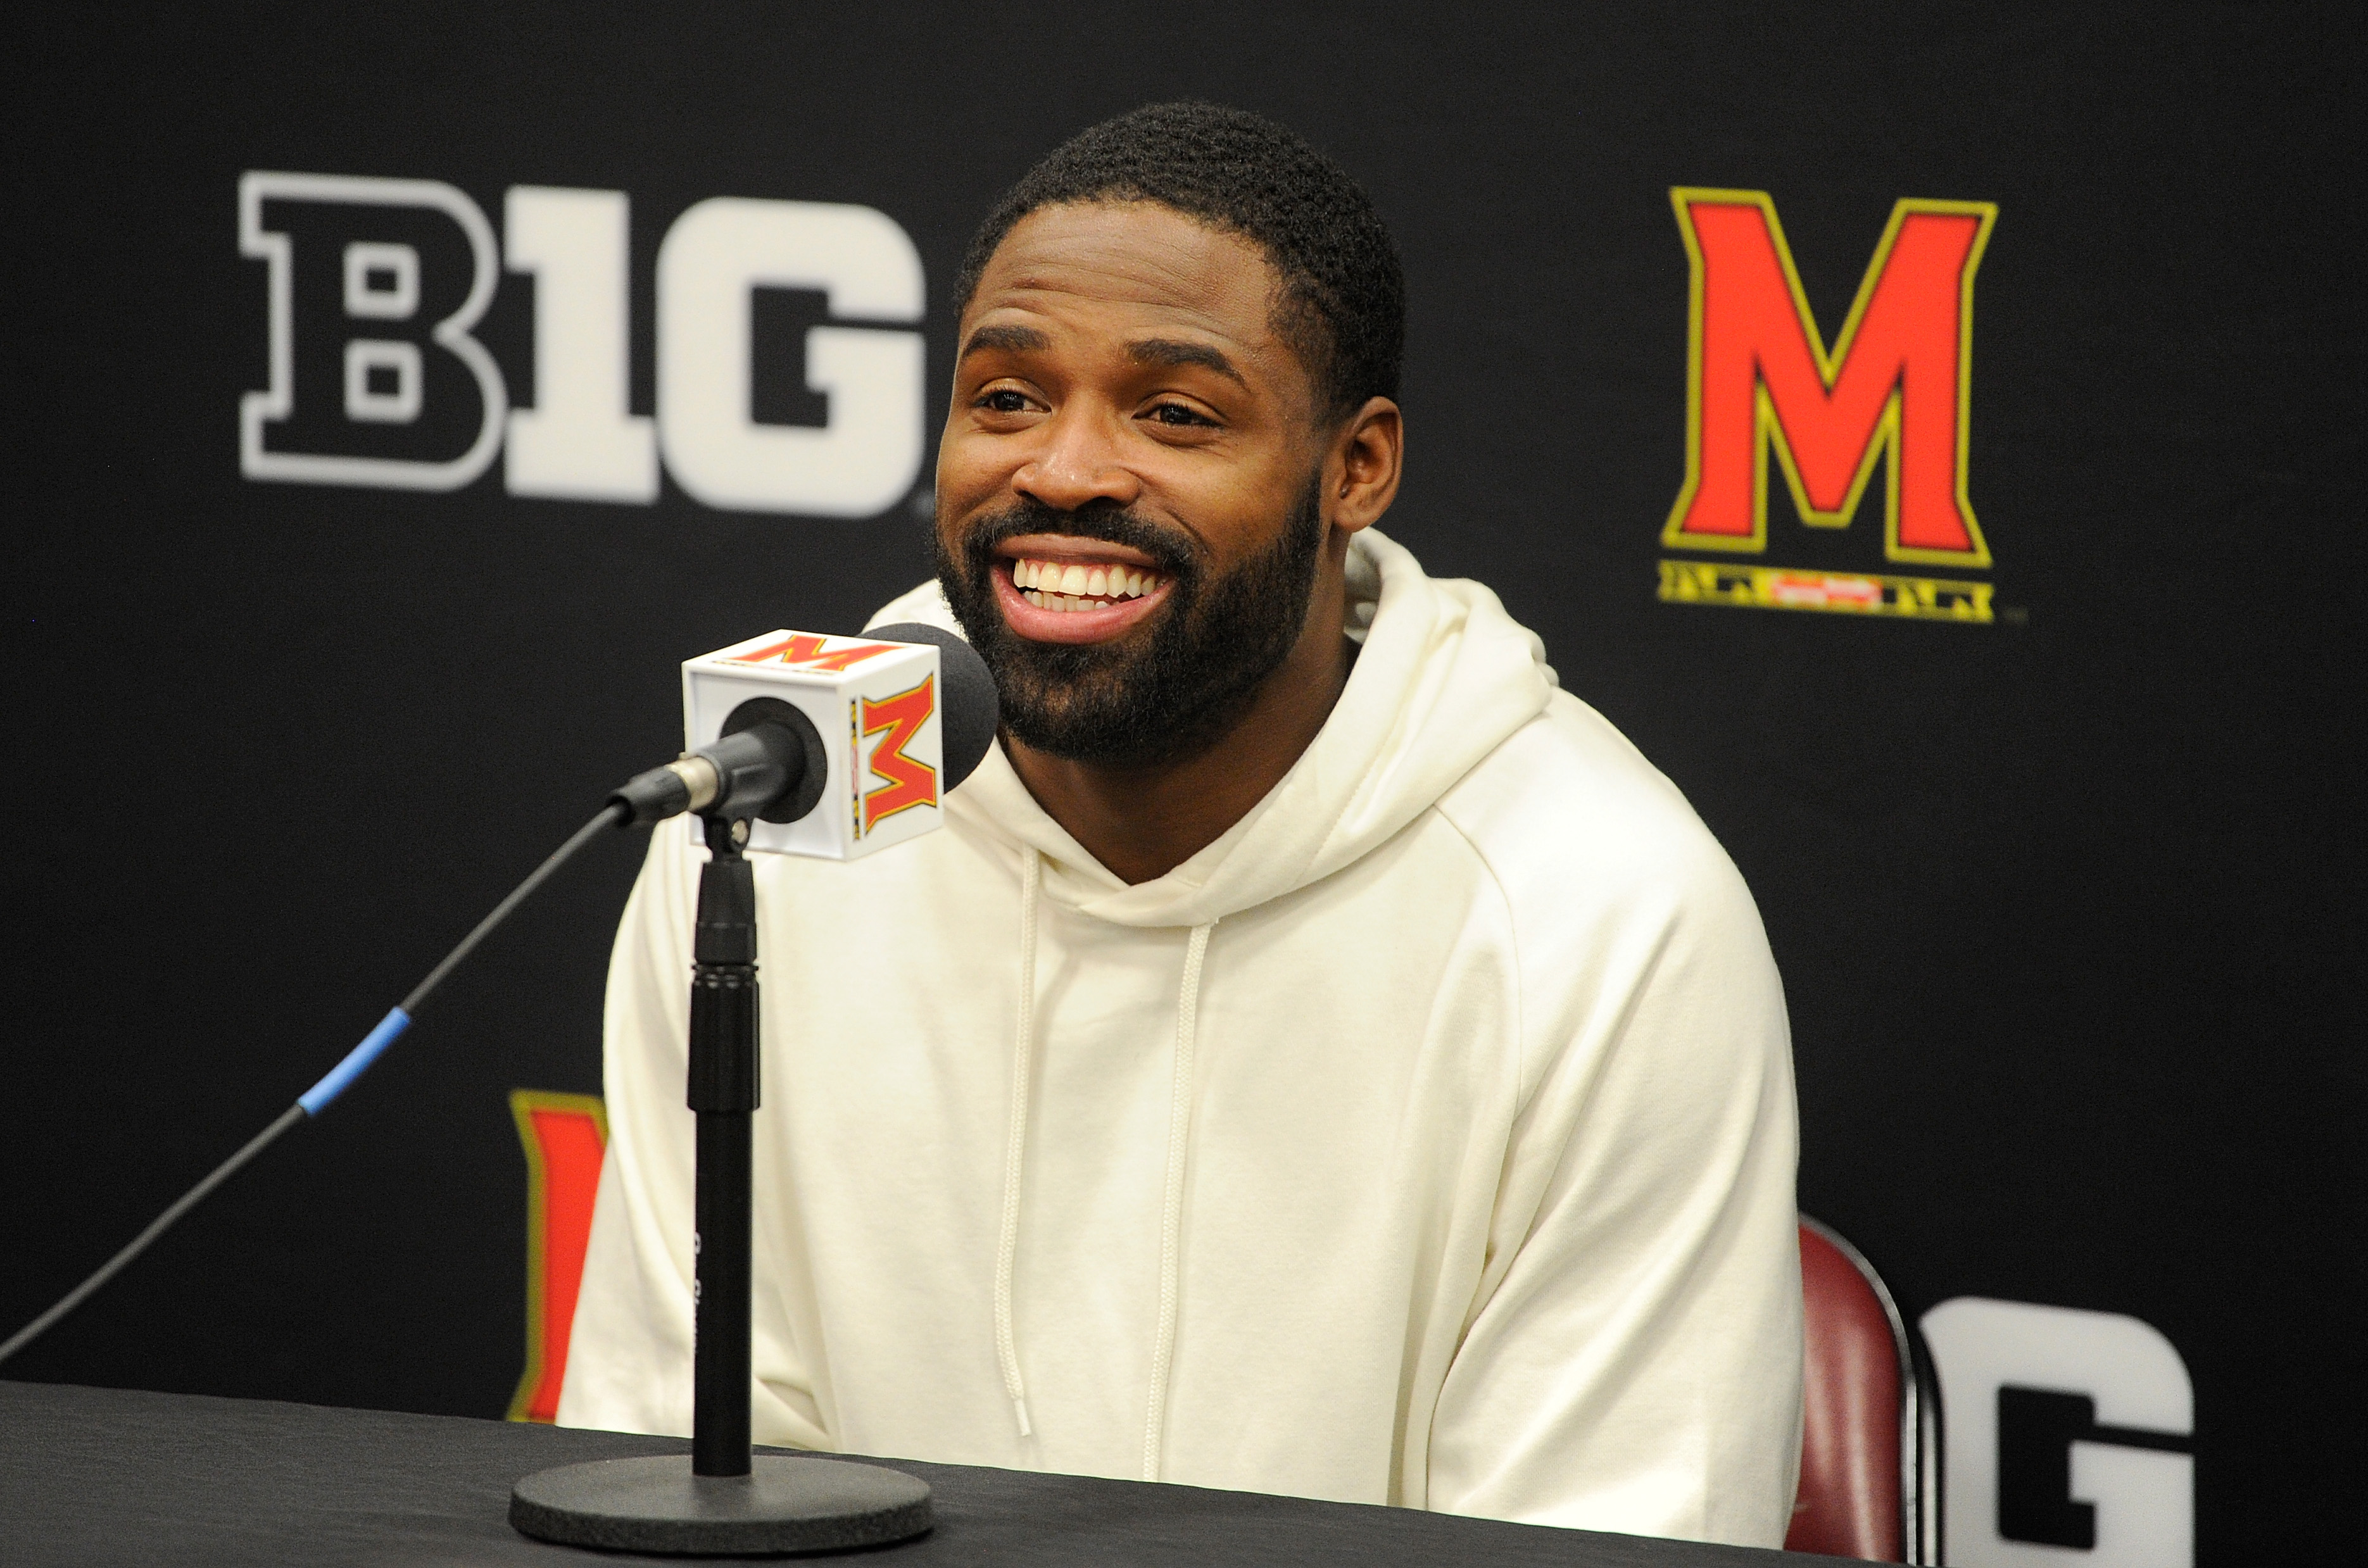 Torrey Smith talks to the media before the game between the Maryland Terrapins and the Michigan Wolverines at Xfinity Center in College Park, Maryland on Feb. 24, 2018. (G Fiume&mdash;Getty Images)